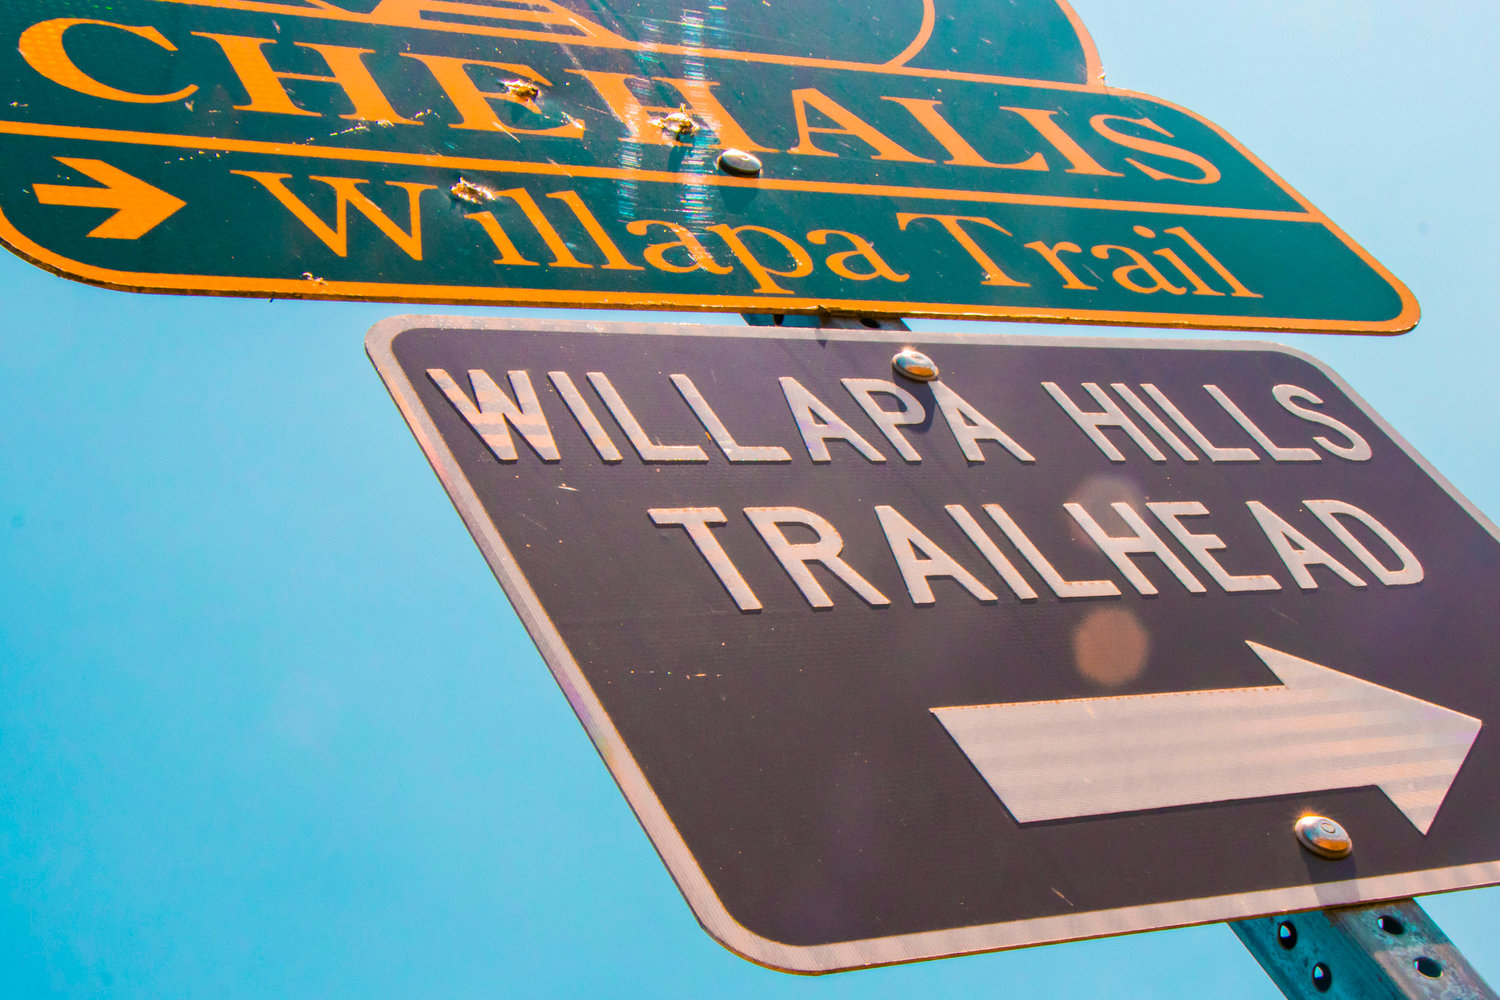 The Willapa Hills Trailhead is located off SW Hilliburger Road in Chehalis.